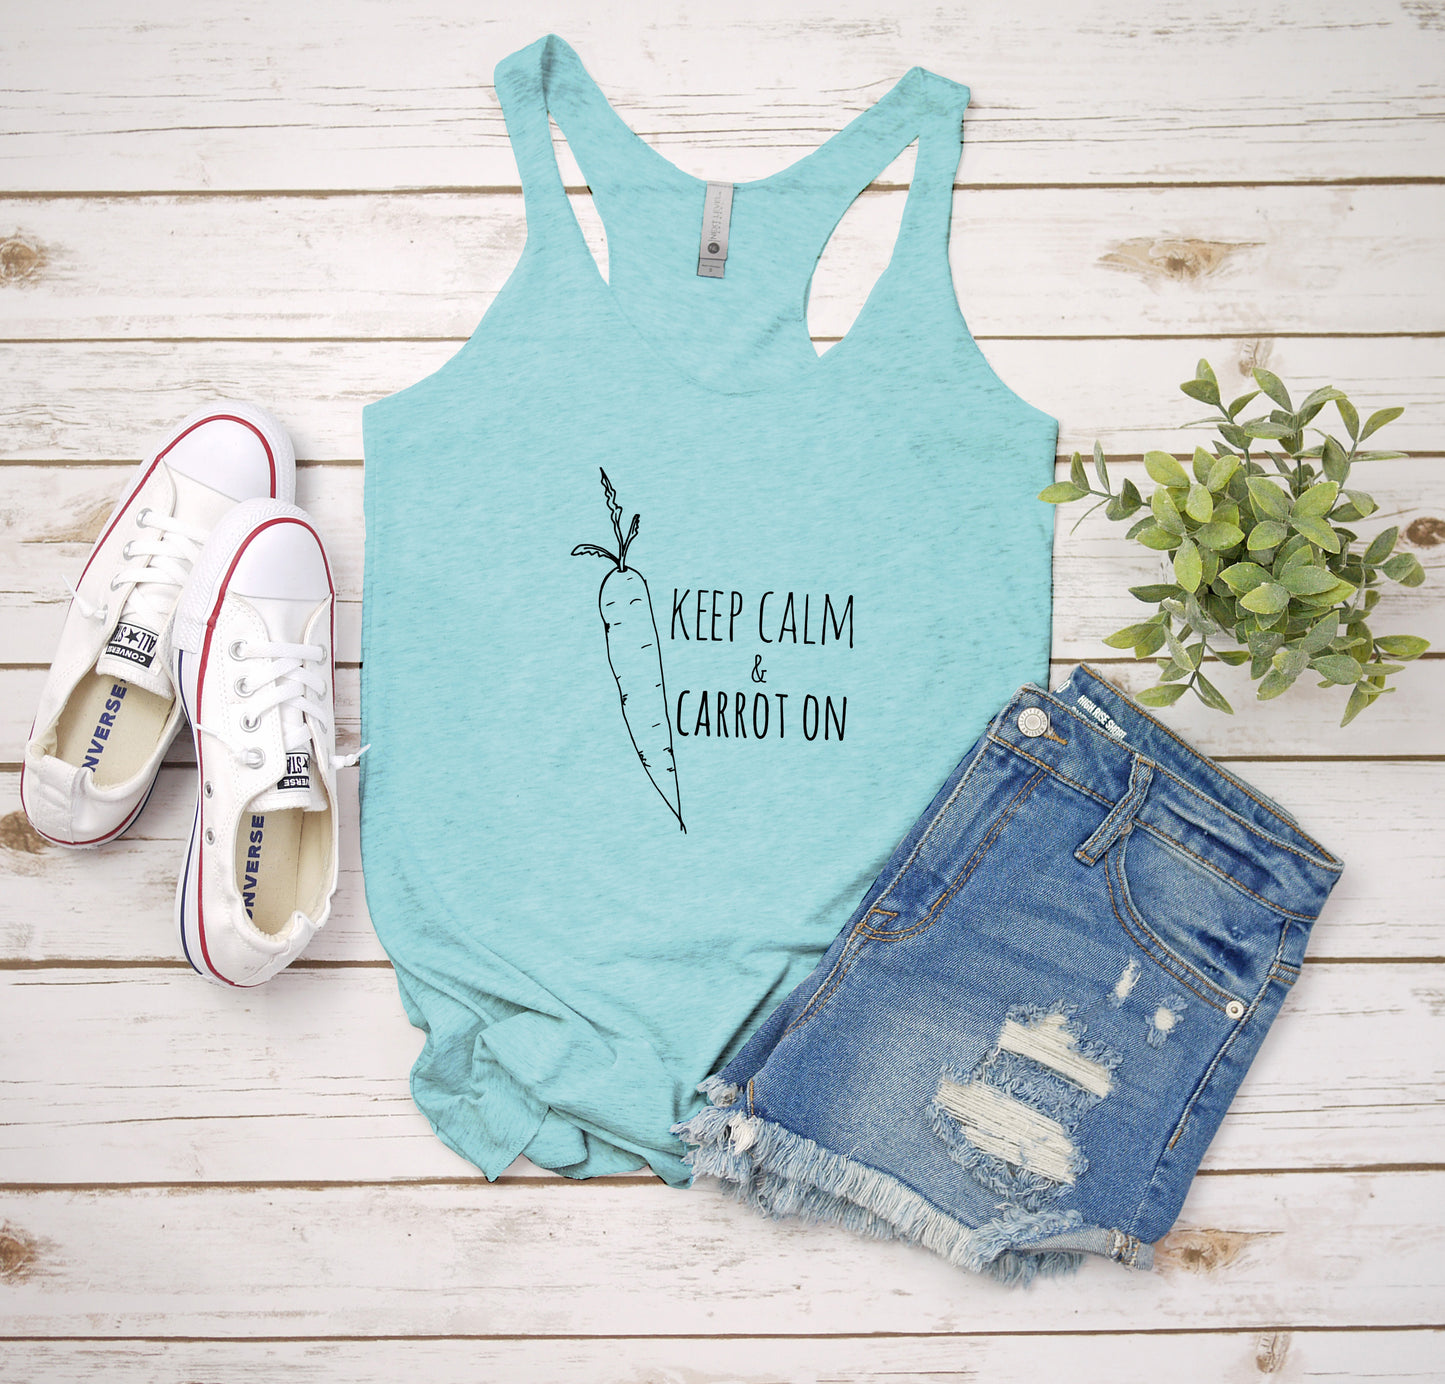 Keep Calm and Carrot On - Women's Tank - Heather Gray, Tahiti, or Envy